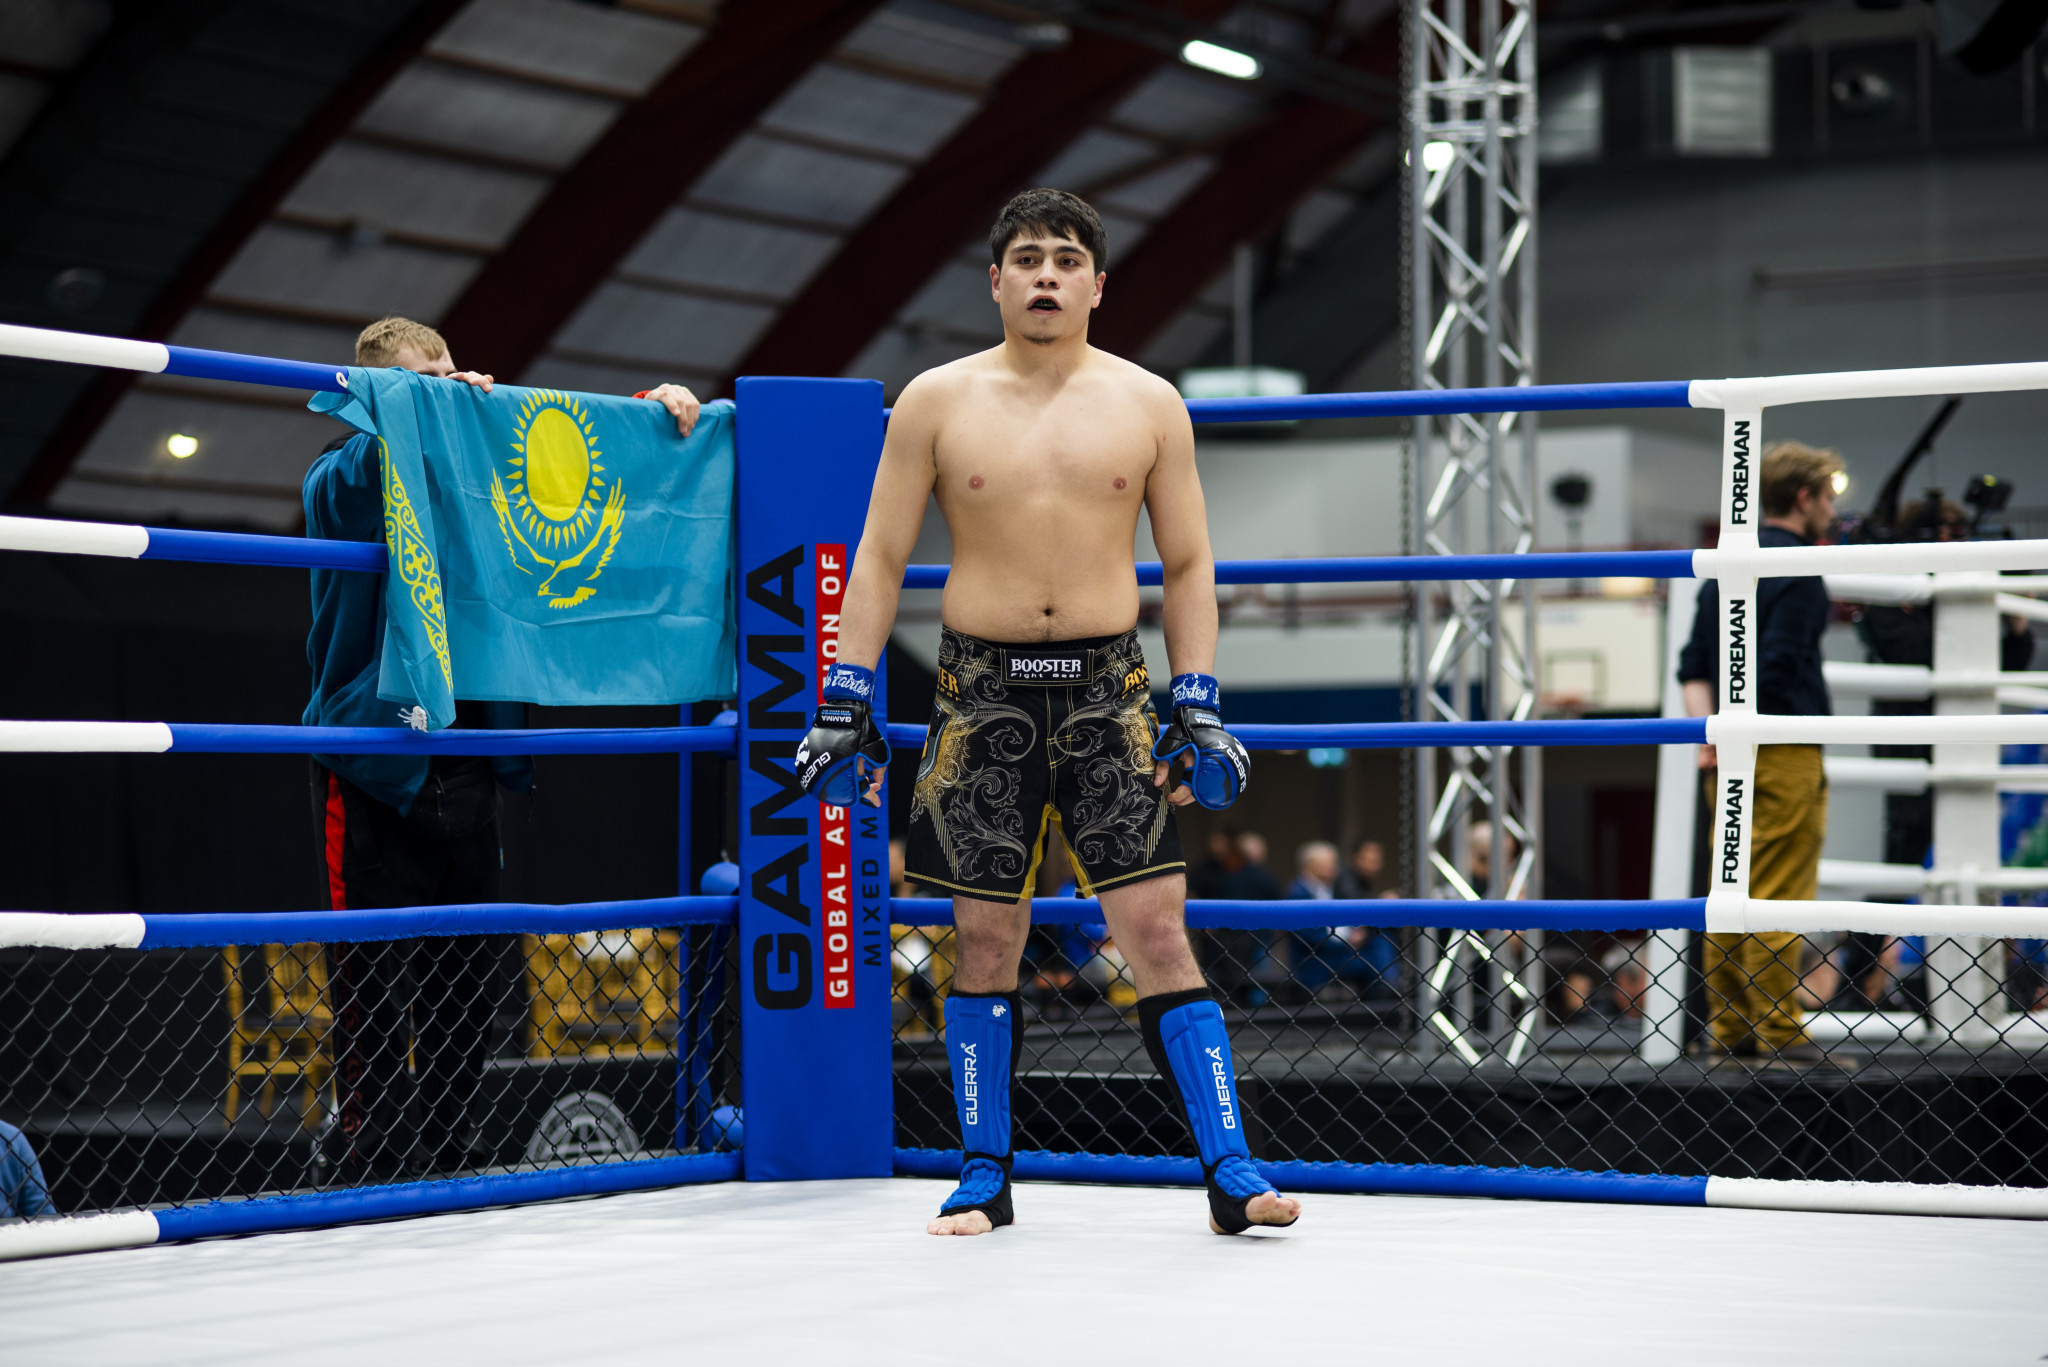 Kazakhstan has seven athletes in the MMA finals at the GAMMA World Championships ©GAMMA